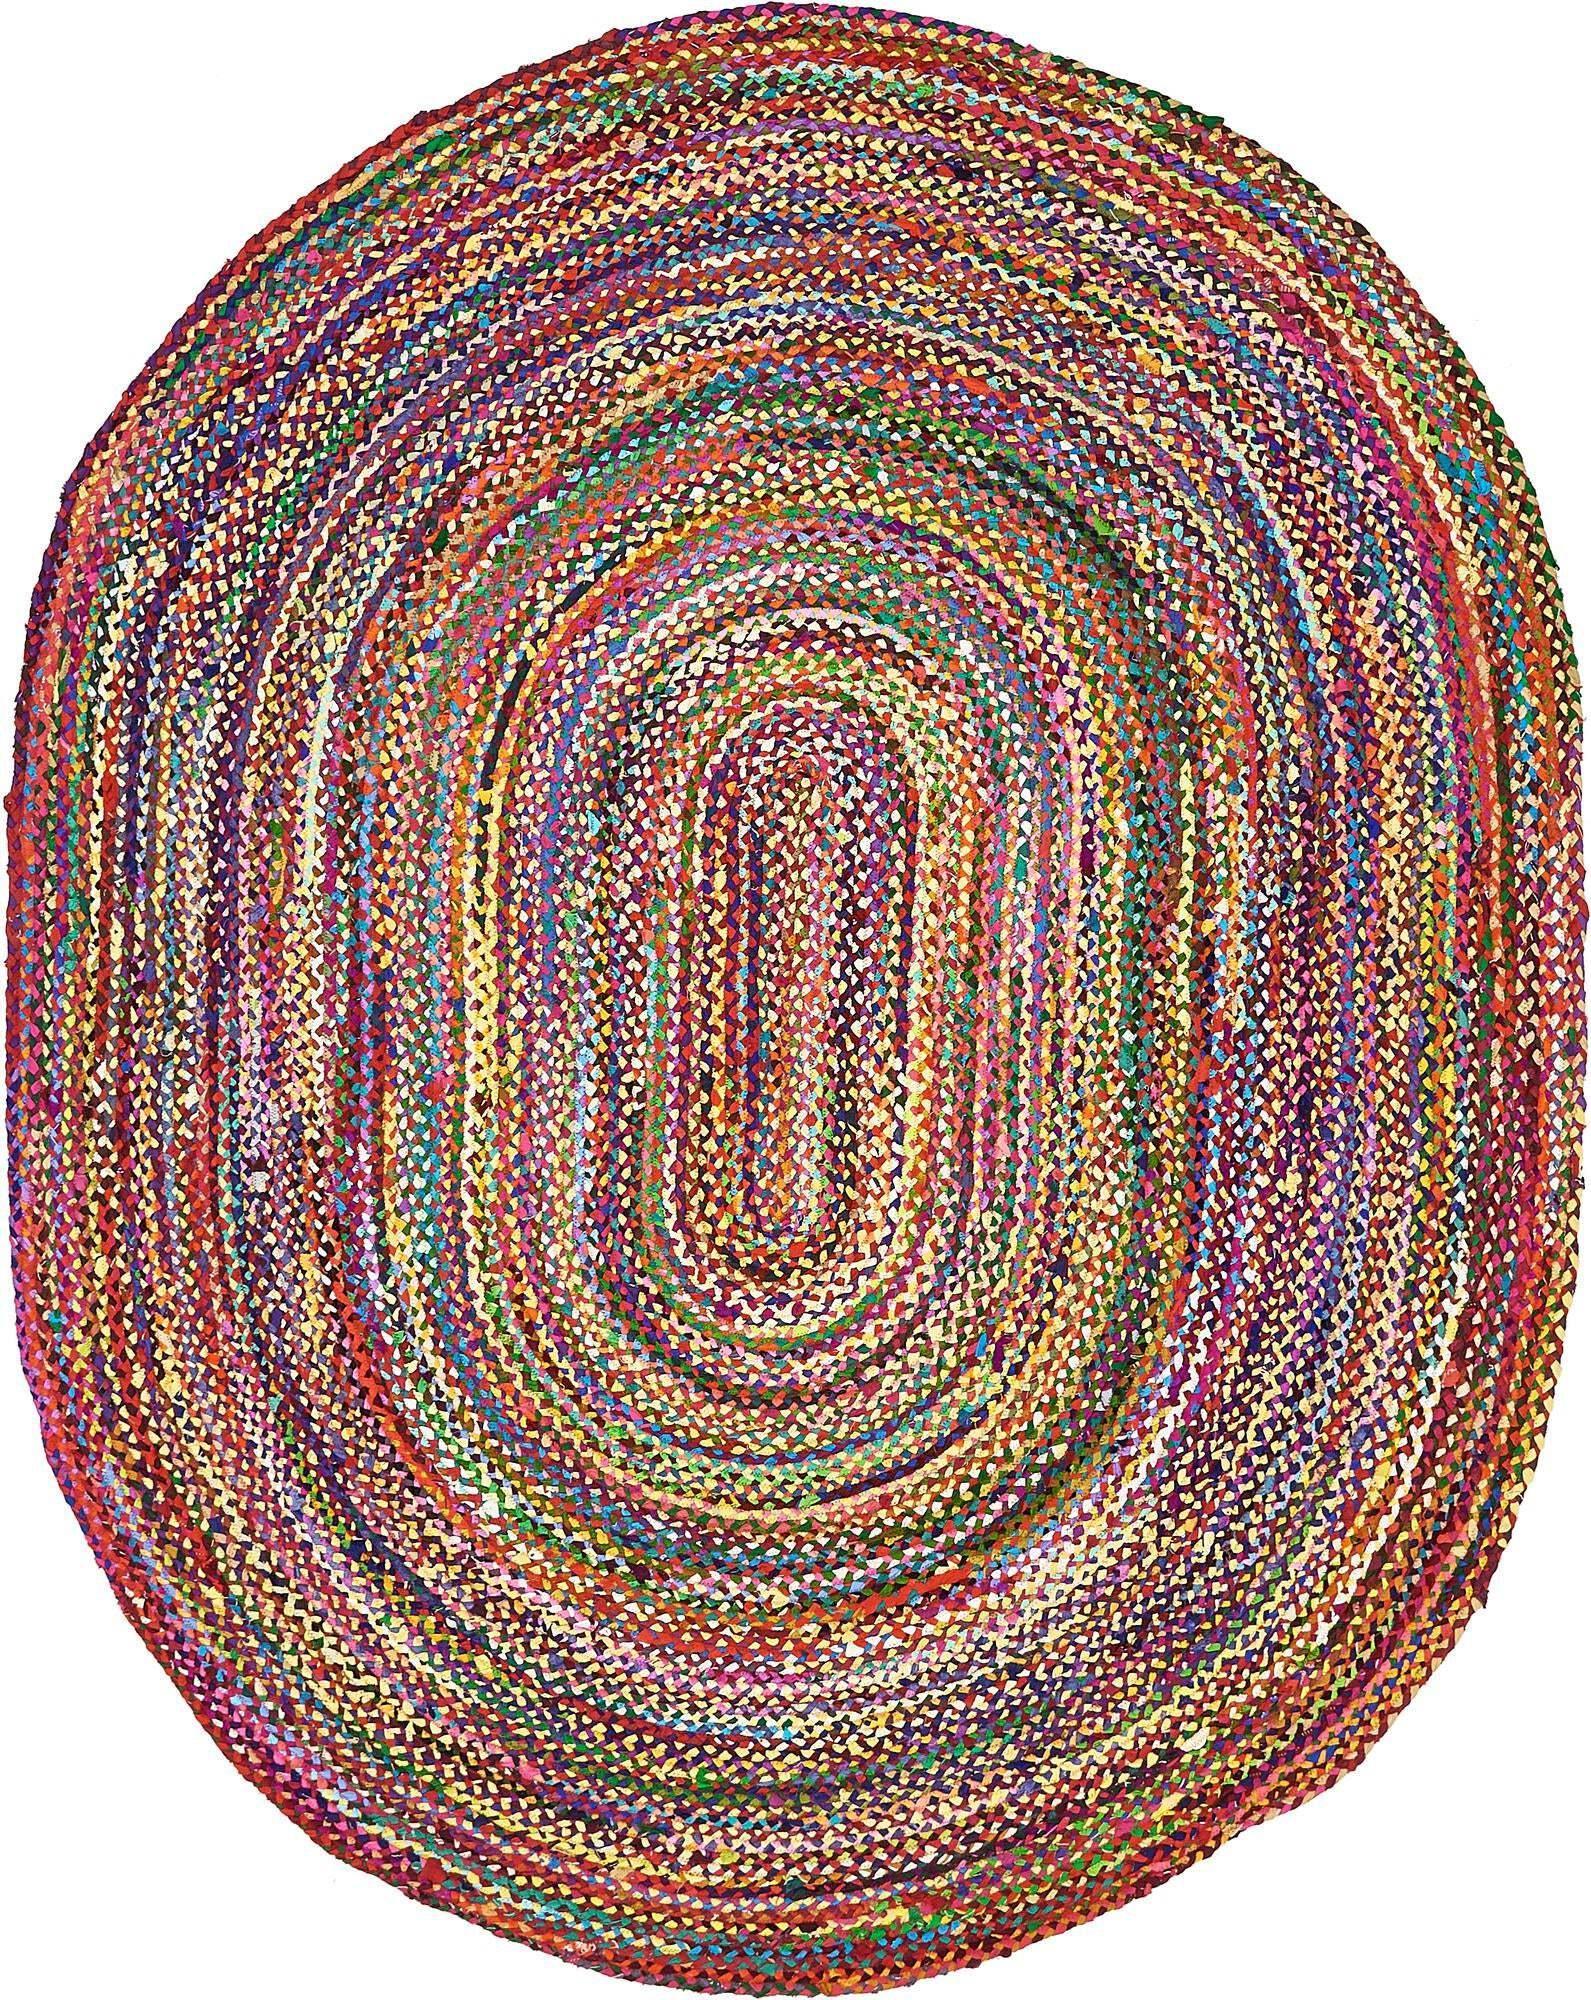 http://www.casaone.com/cdn/shop/files/braided-chindi-abstract-oval-8x10-oval-rug-multi-and-pink-unique-loom-casaone-1.jpg?v=1686650668